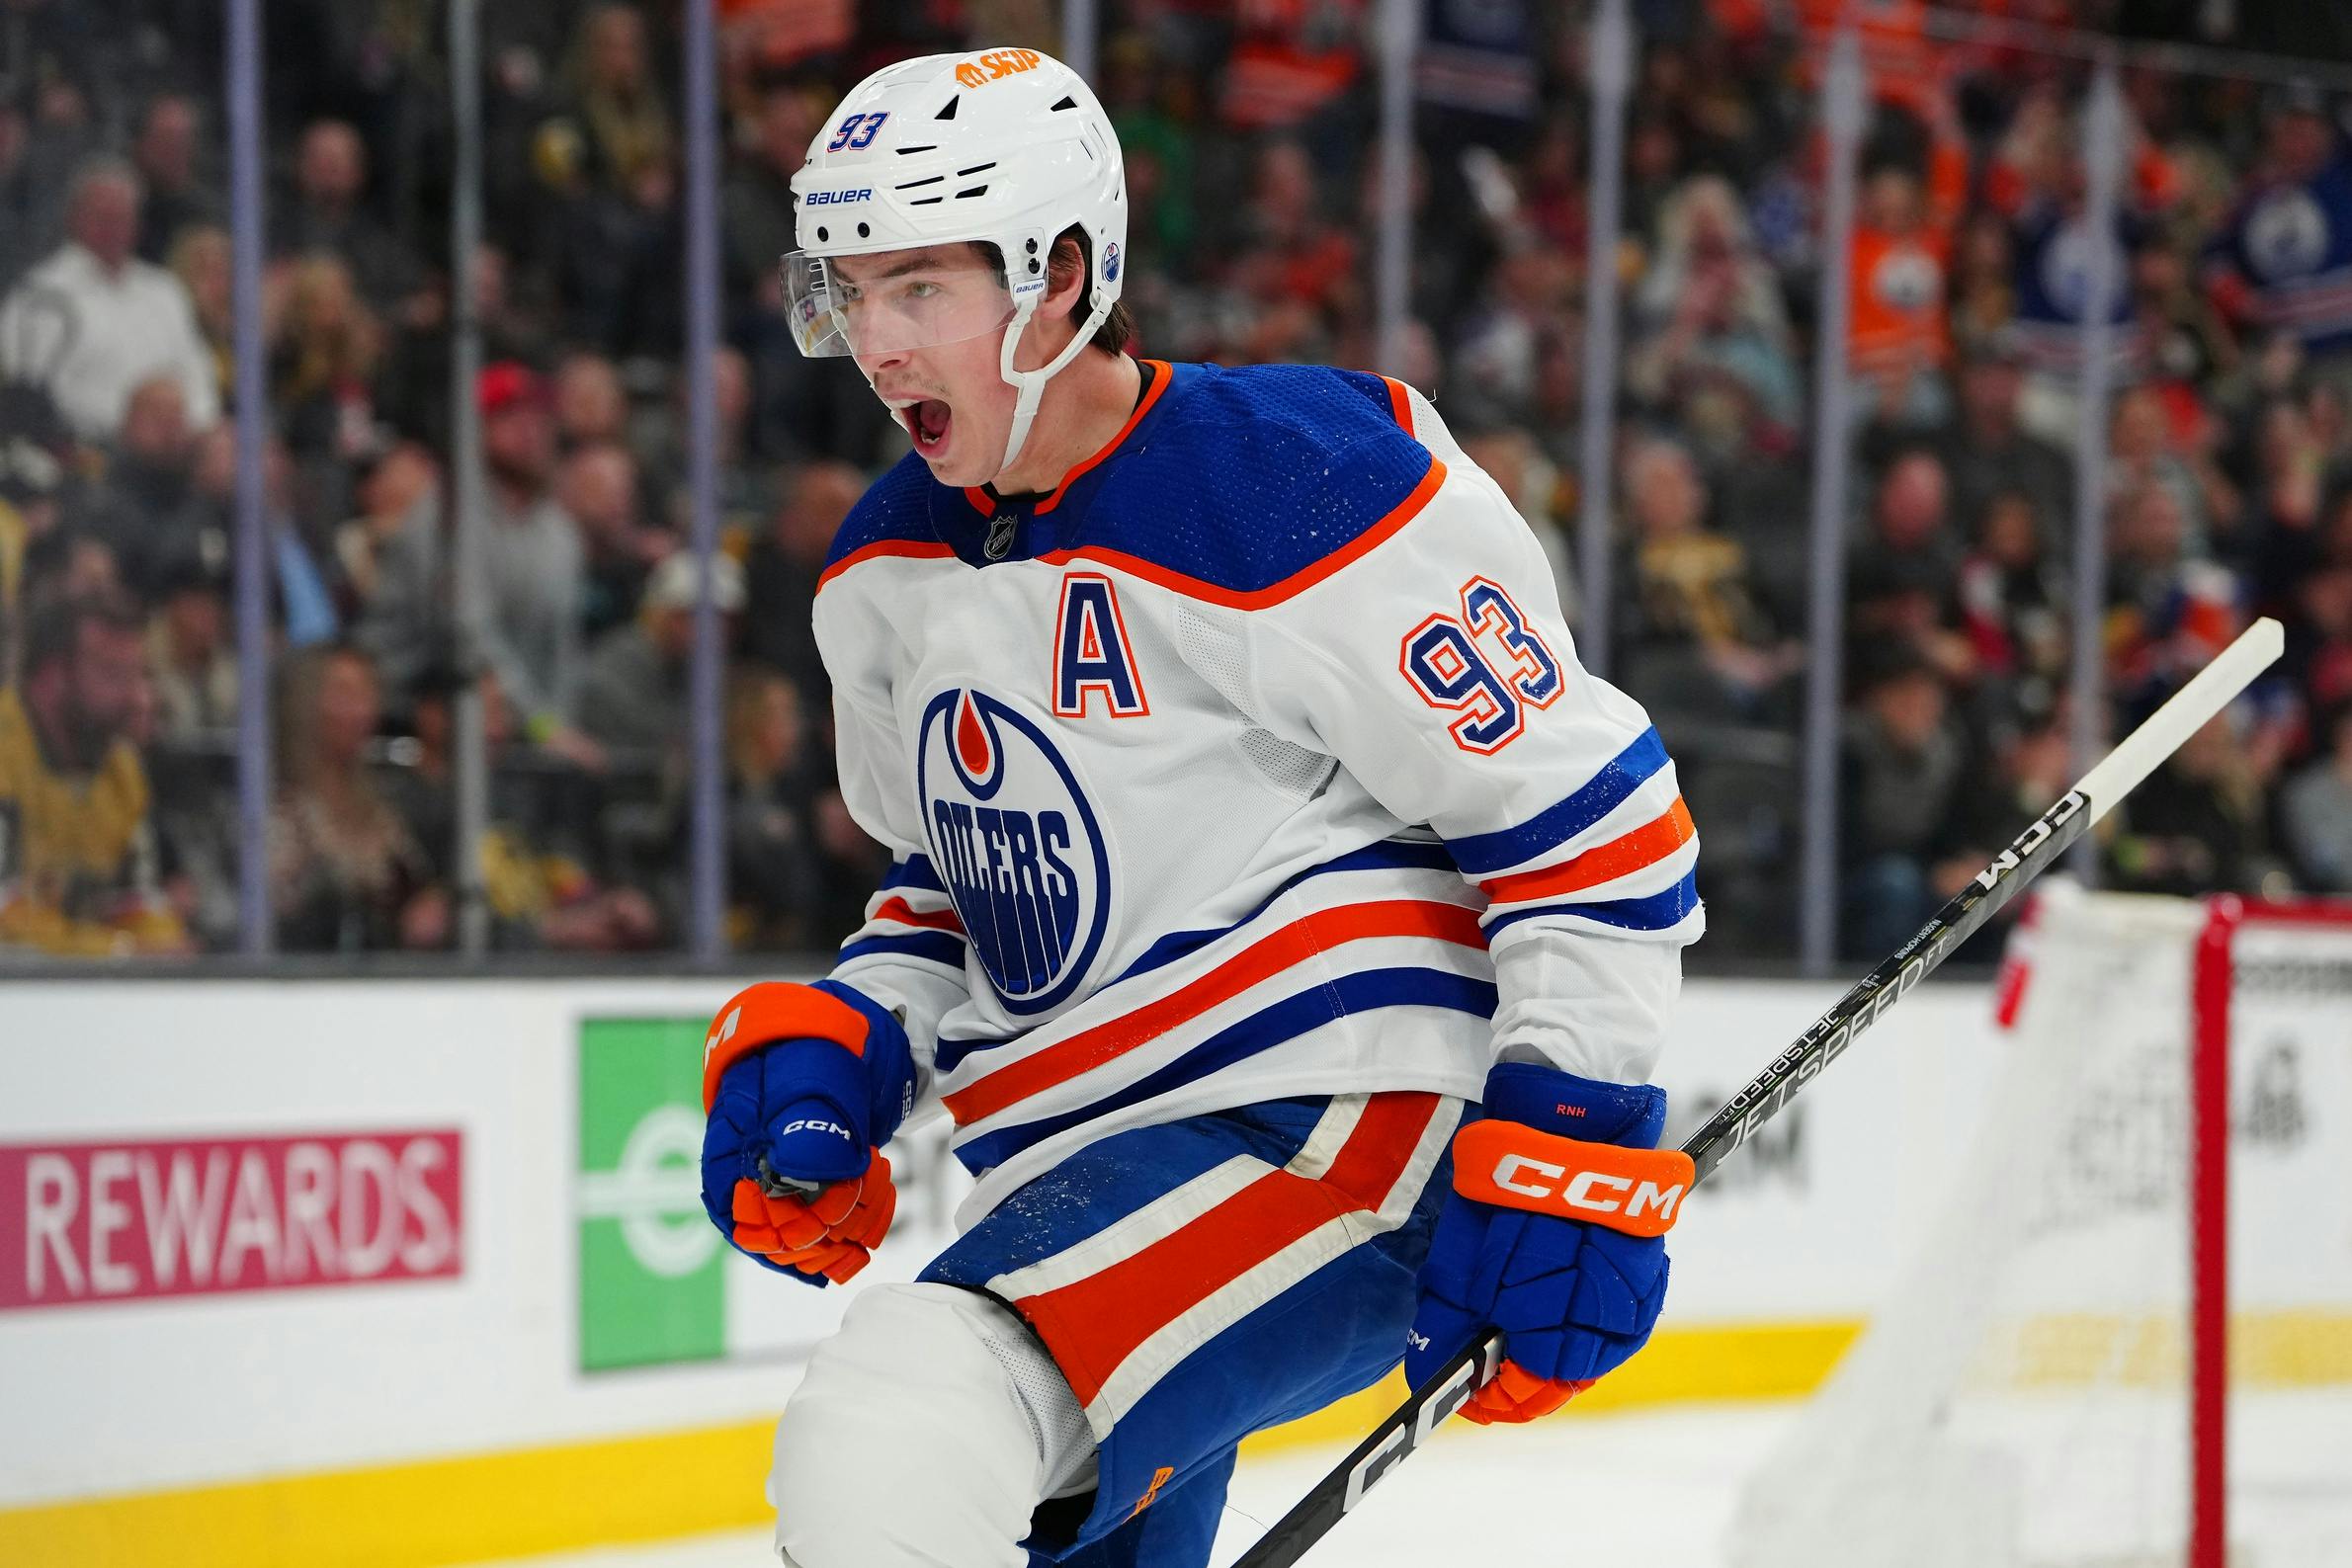 Ryan Nugent-Hopkins hits 100 points on the season - OilersNation